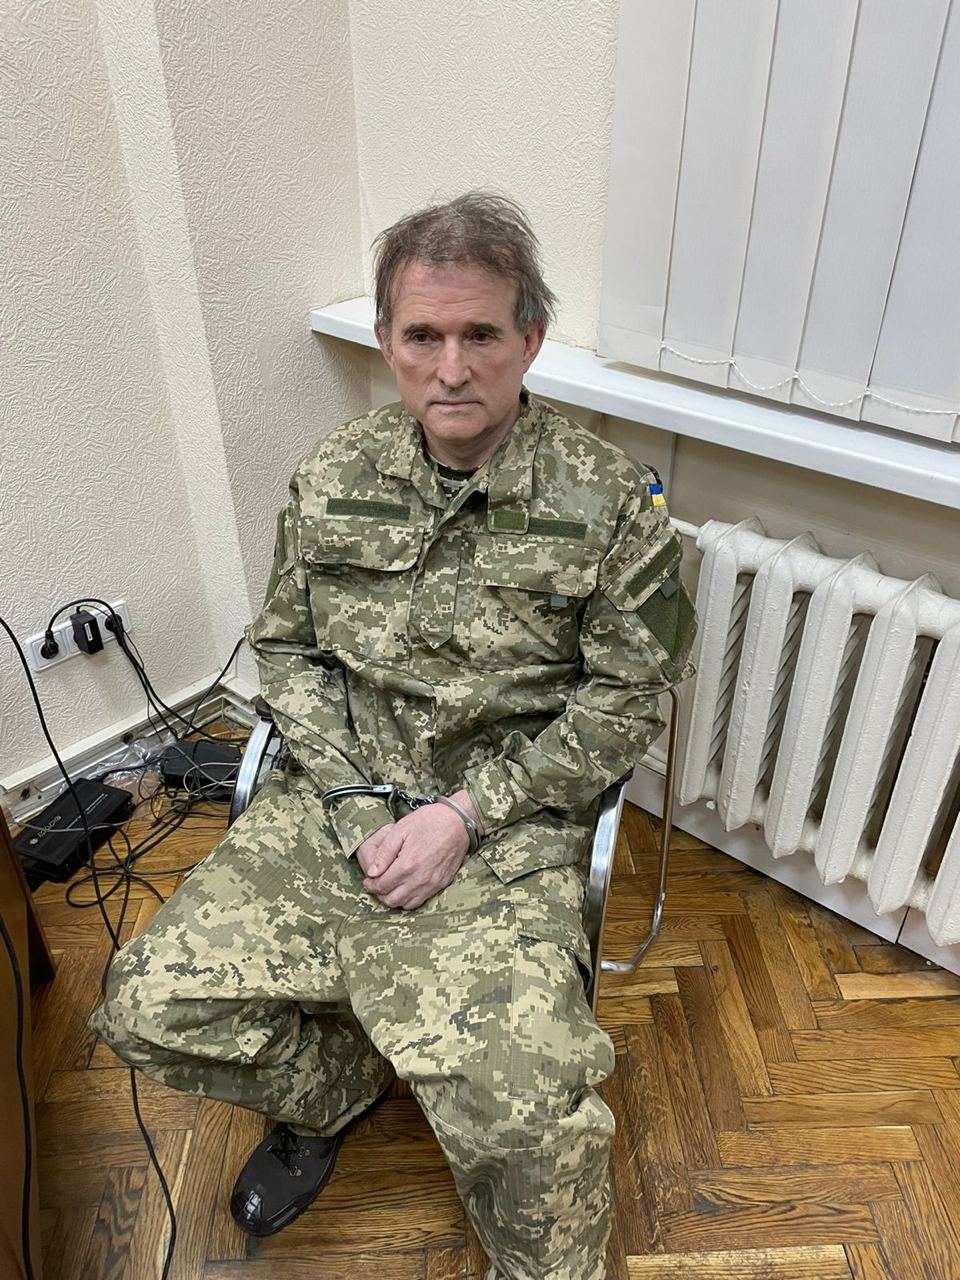 Medvedchuk was detained. This was announced by Zelensky